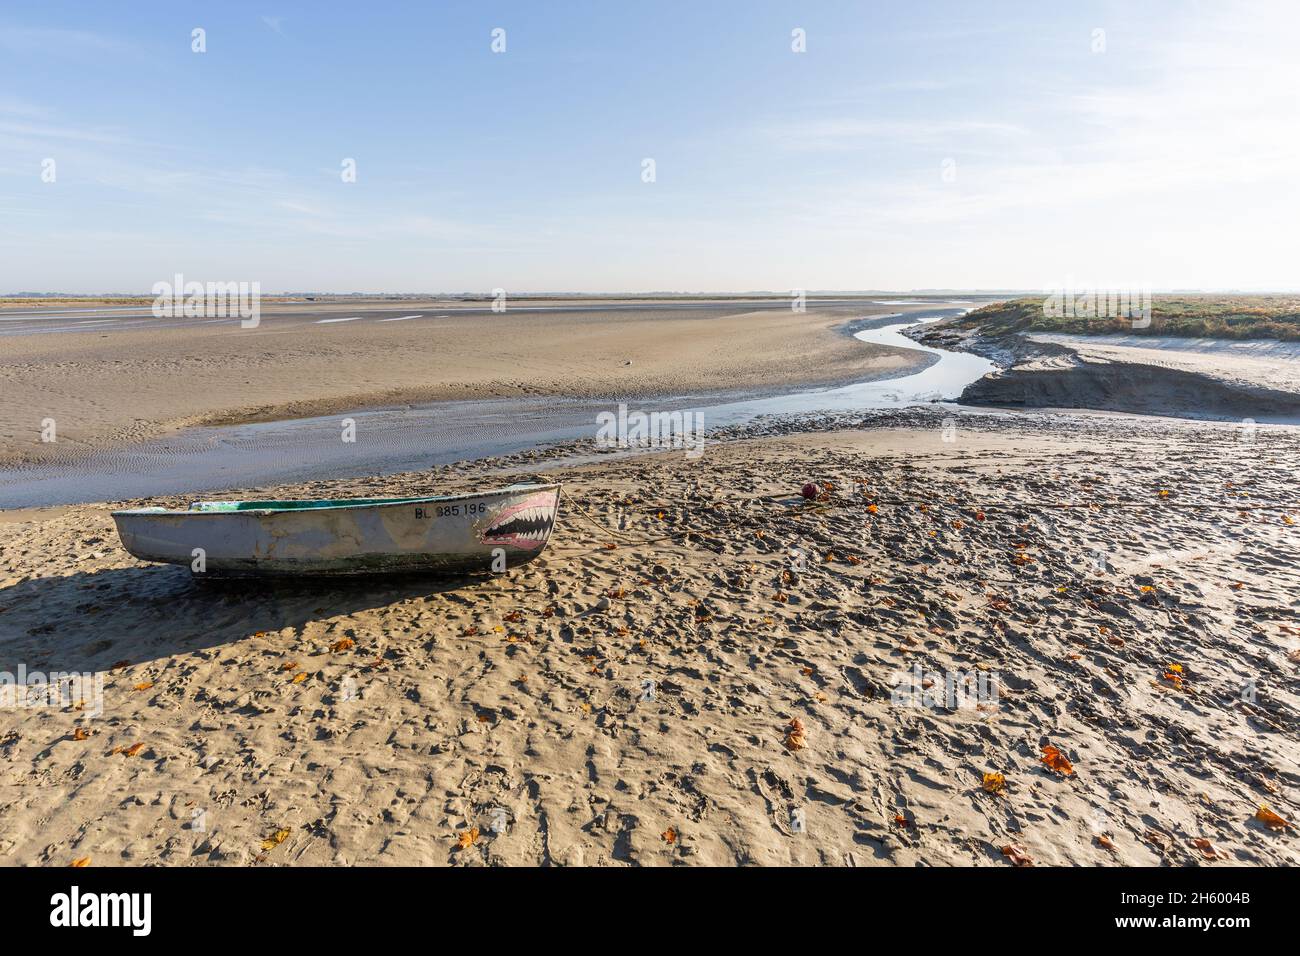 Rowboat beached in the Baie de Somme at low tide. Saint-Valery, France Stock Photo